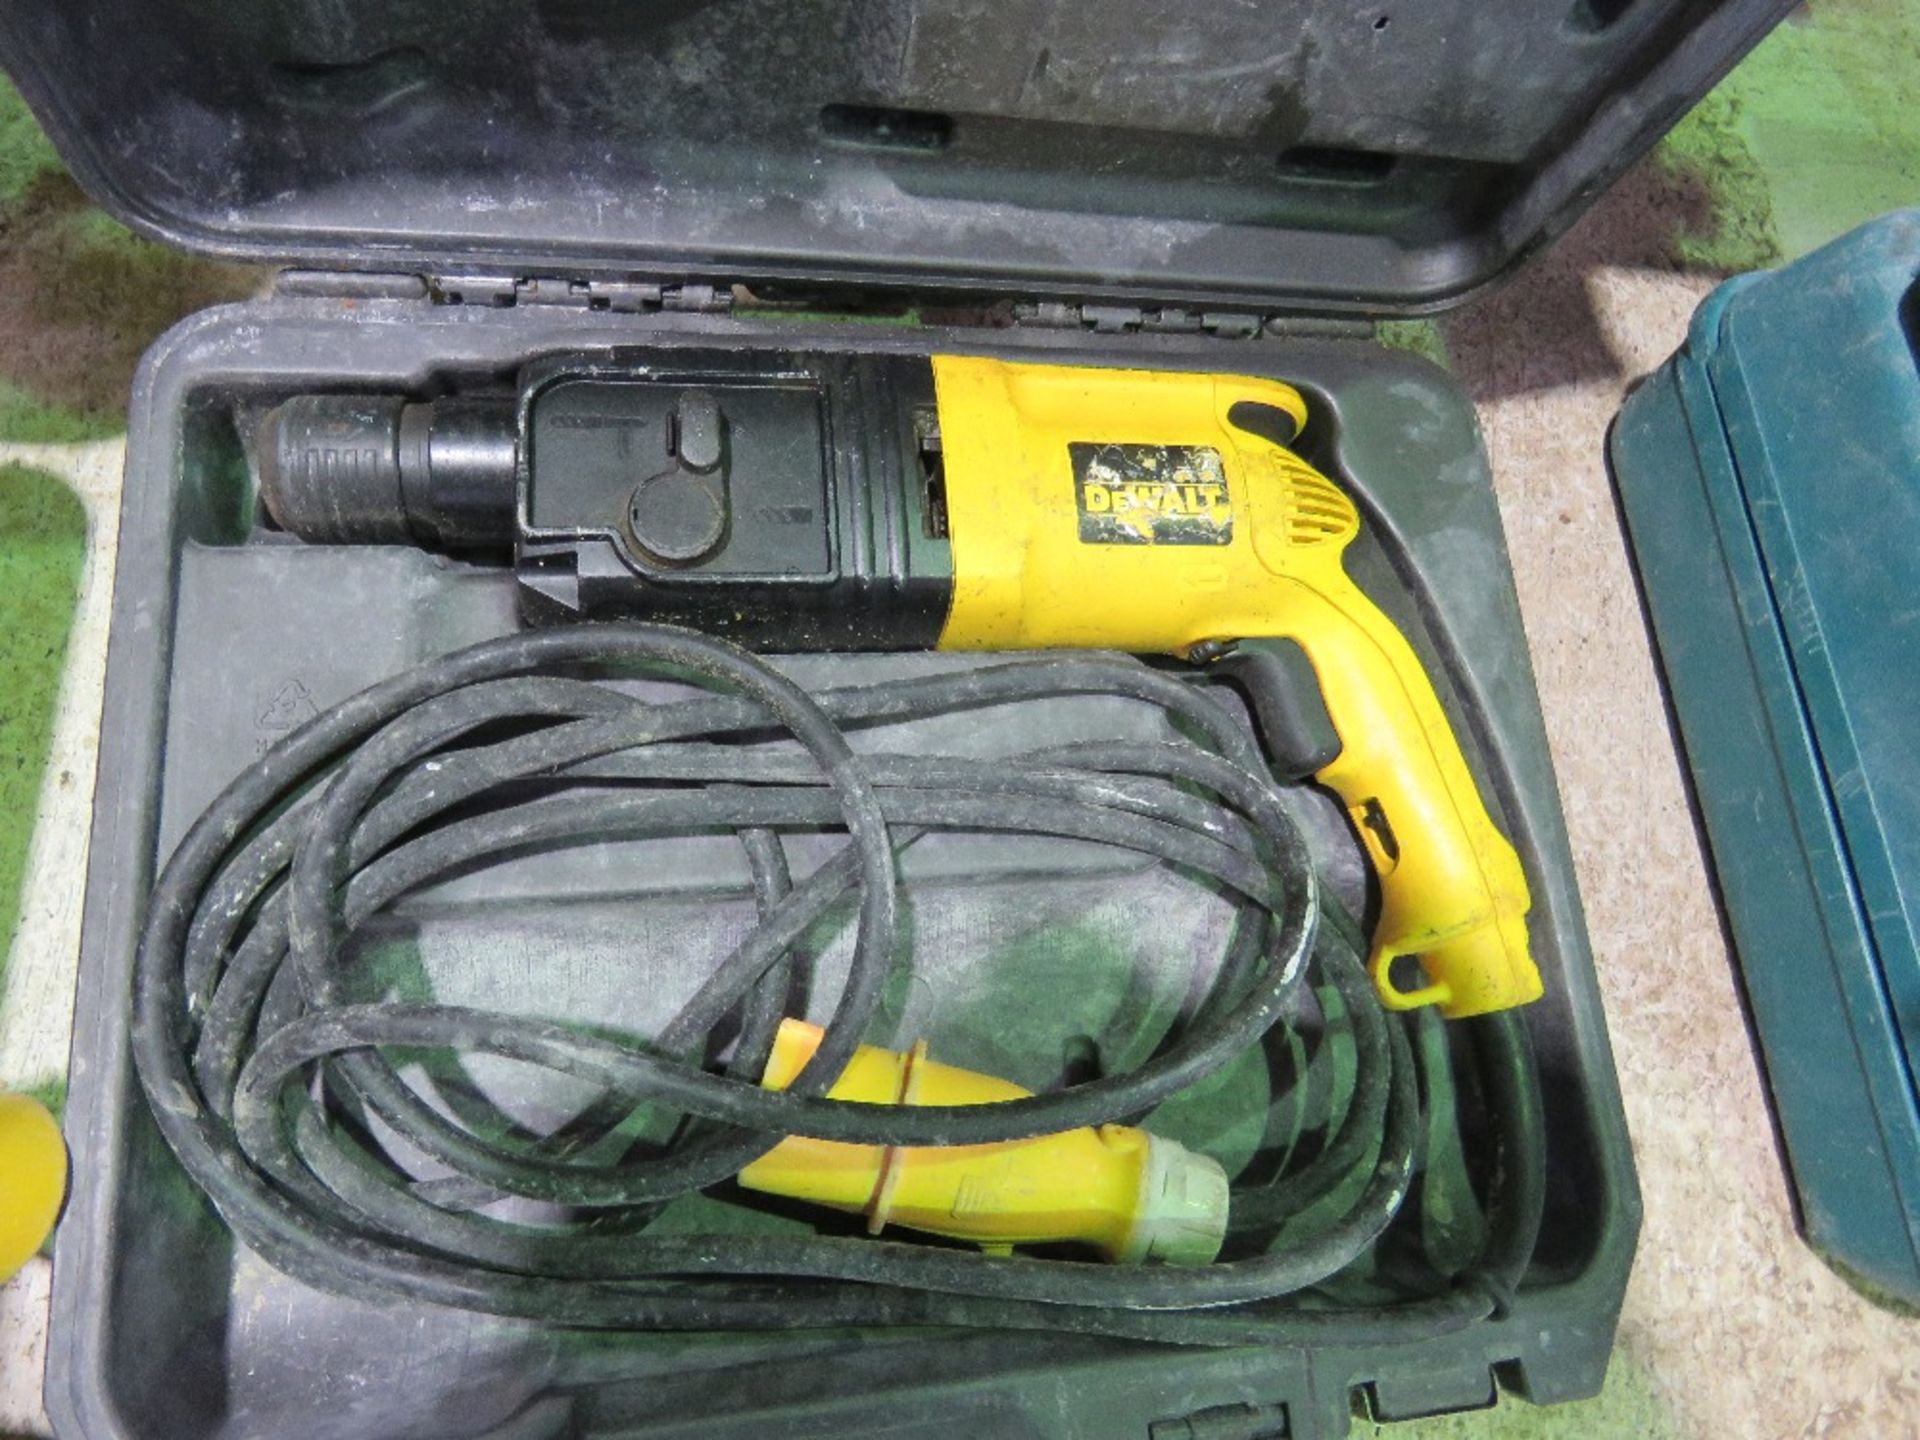 3 X POWER TOOLS: 2 X DRILLS PLUS A CIRCULAR SAW. DIRECT FROM LOCAL COMPANY. - Image 4 of 6